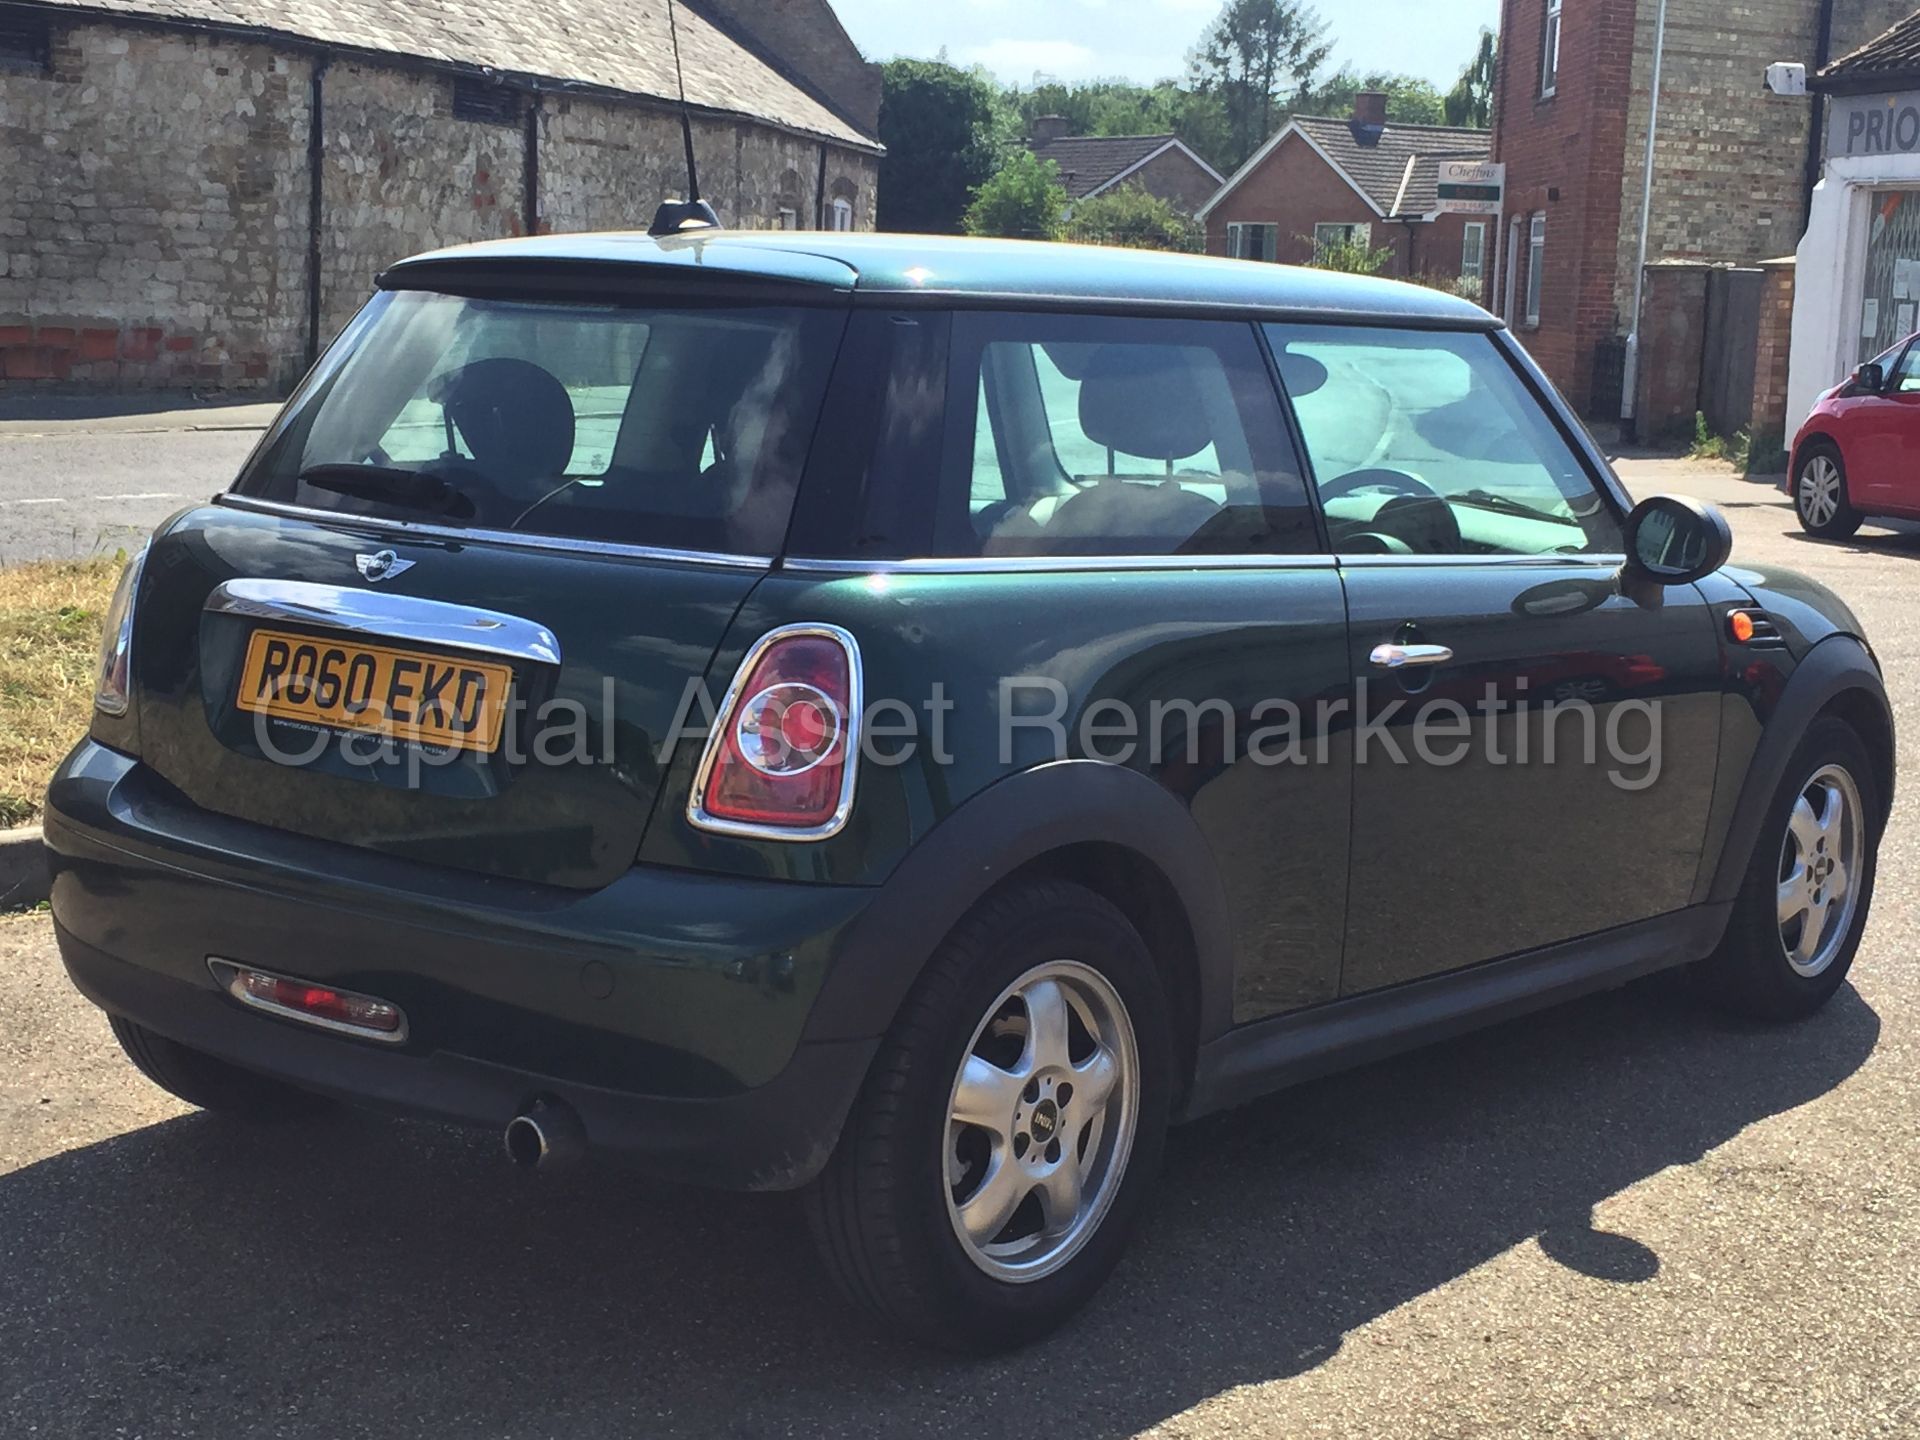 (ON SALE) MINI 'ONE EDITION' (2011 MODEL) '3 DOOR HATCHBACK' '1.6 PETROL - 6 SPEED - AIR CON' - Image 8 of 21